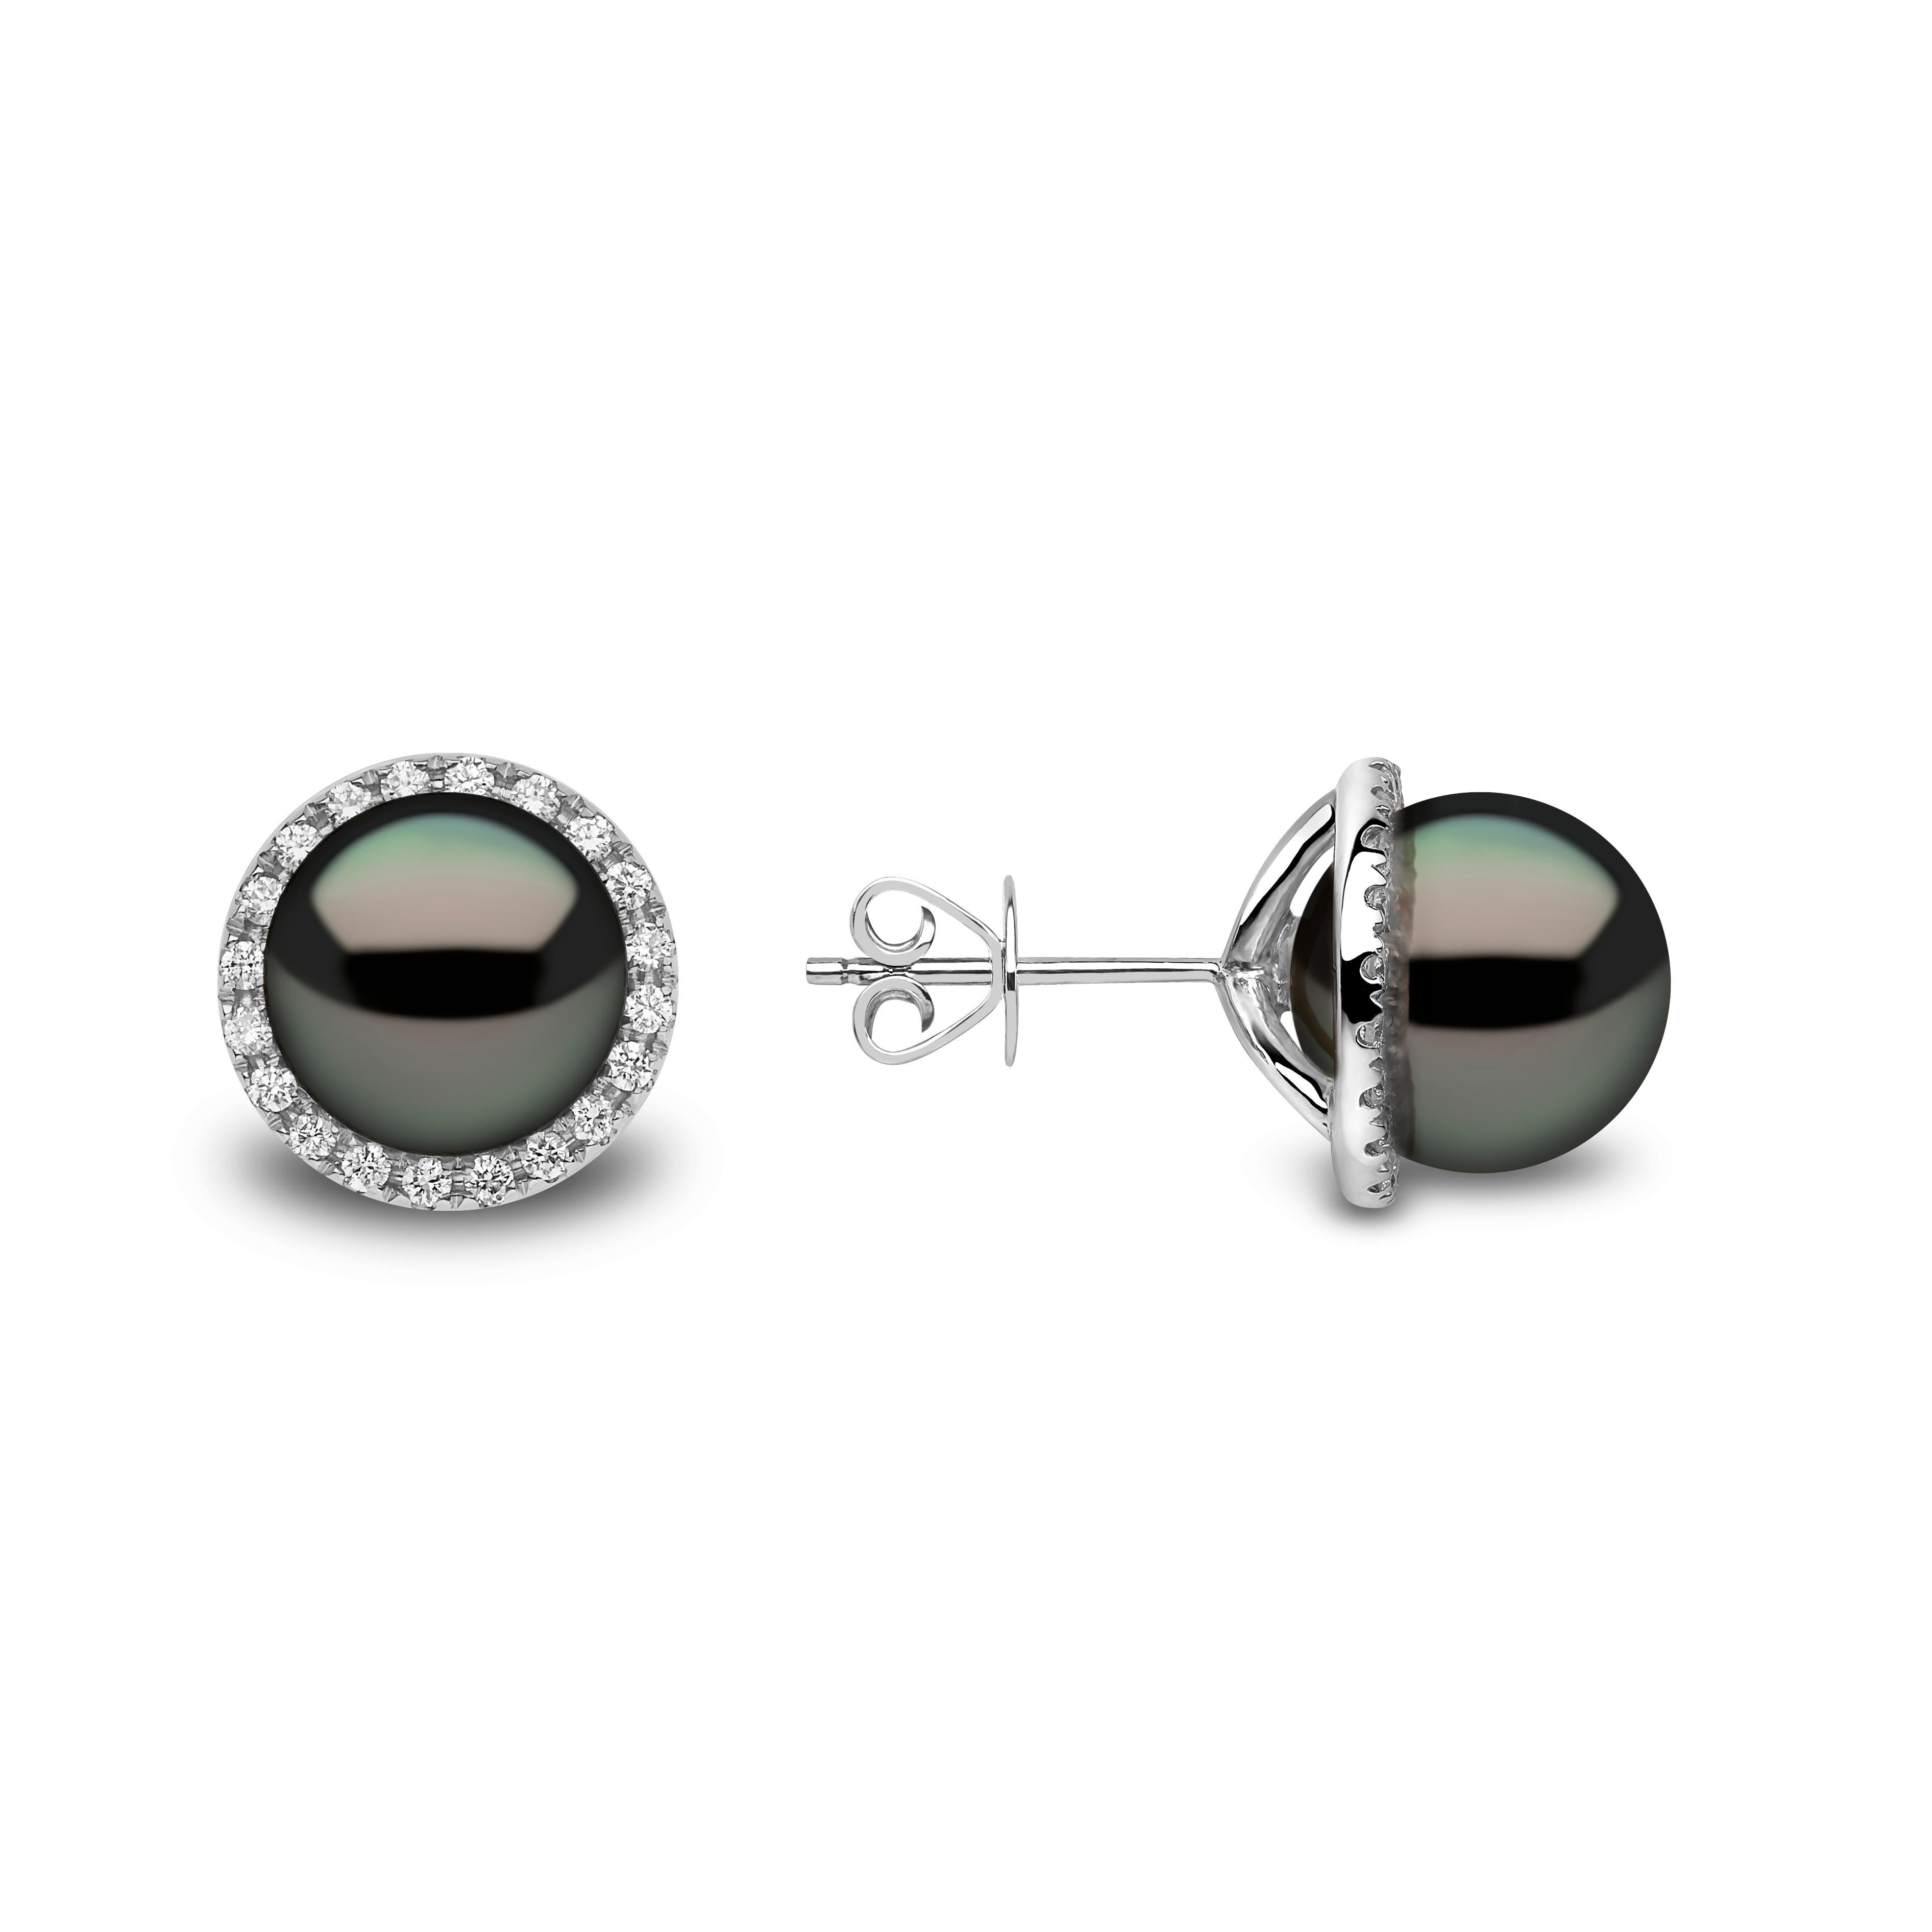 These striking earrings by Yoko London feature Tahitian pearls which add a contemporary twist to an otherwise classic design. Flawlessly engineered in our London atelier, these elegant earrings are perfect for pairing with both daytime and evening